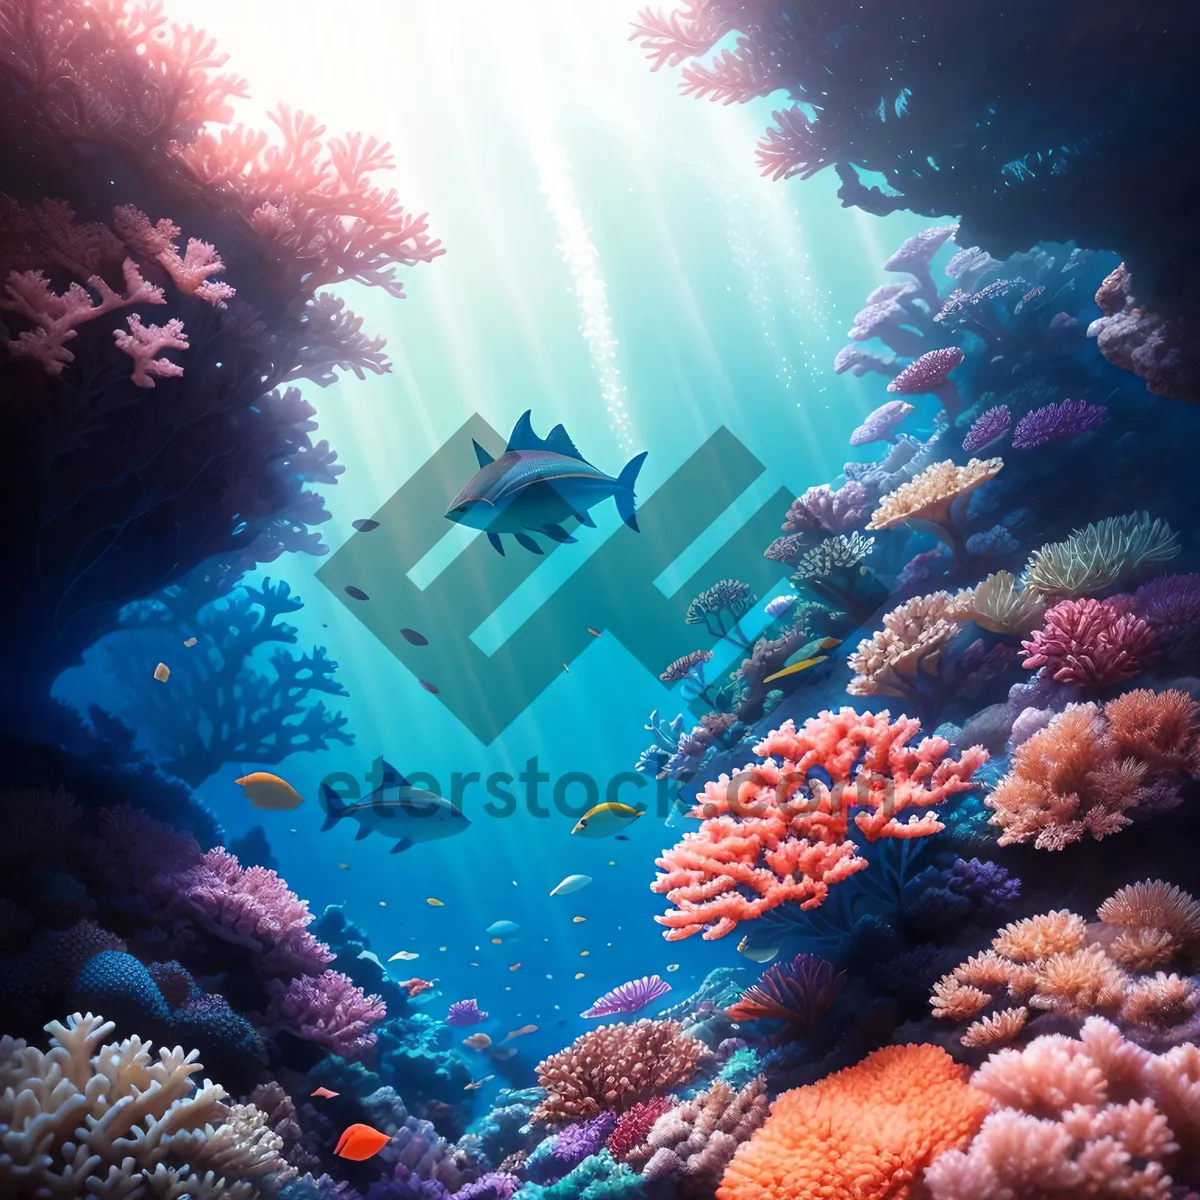 Picture of Exotic Underwater Coral Reef: Colorful Marine Life in Sunlit Waters.